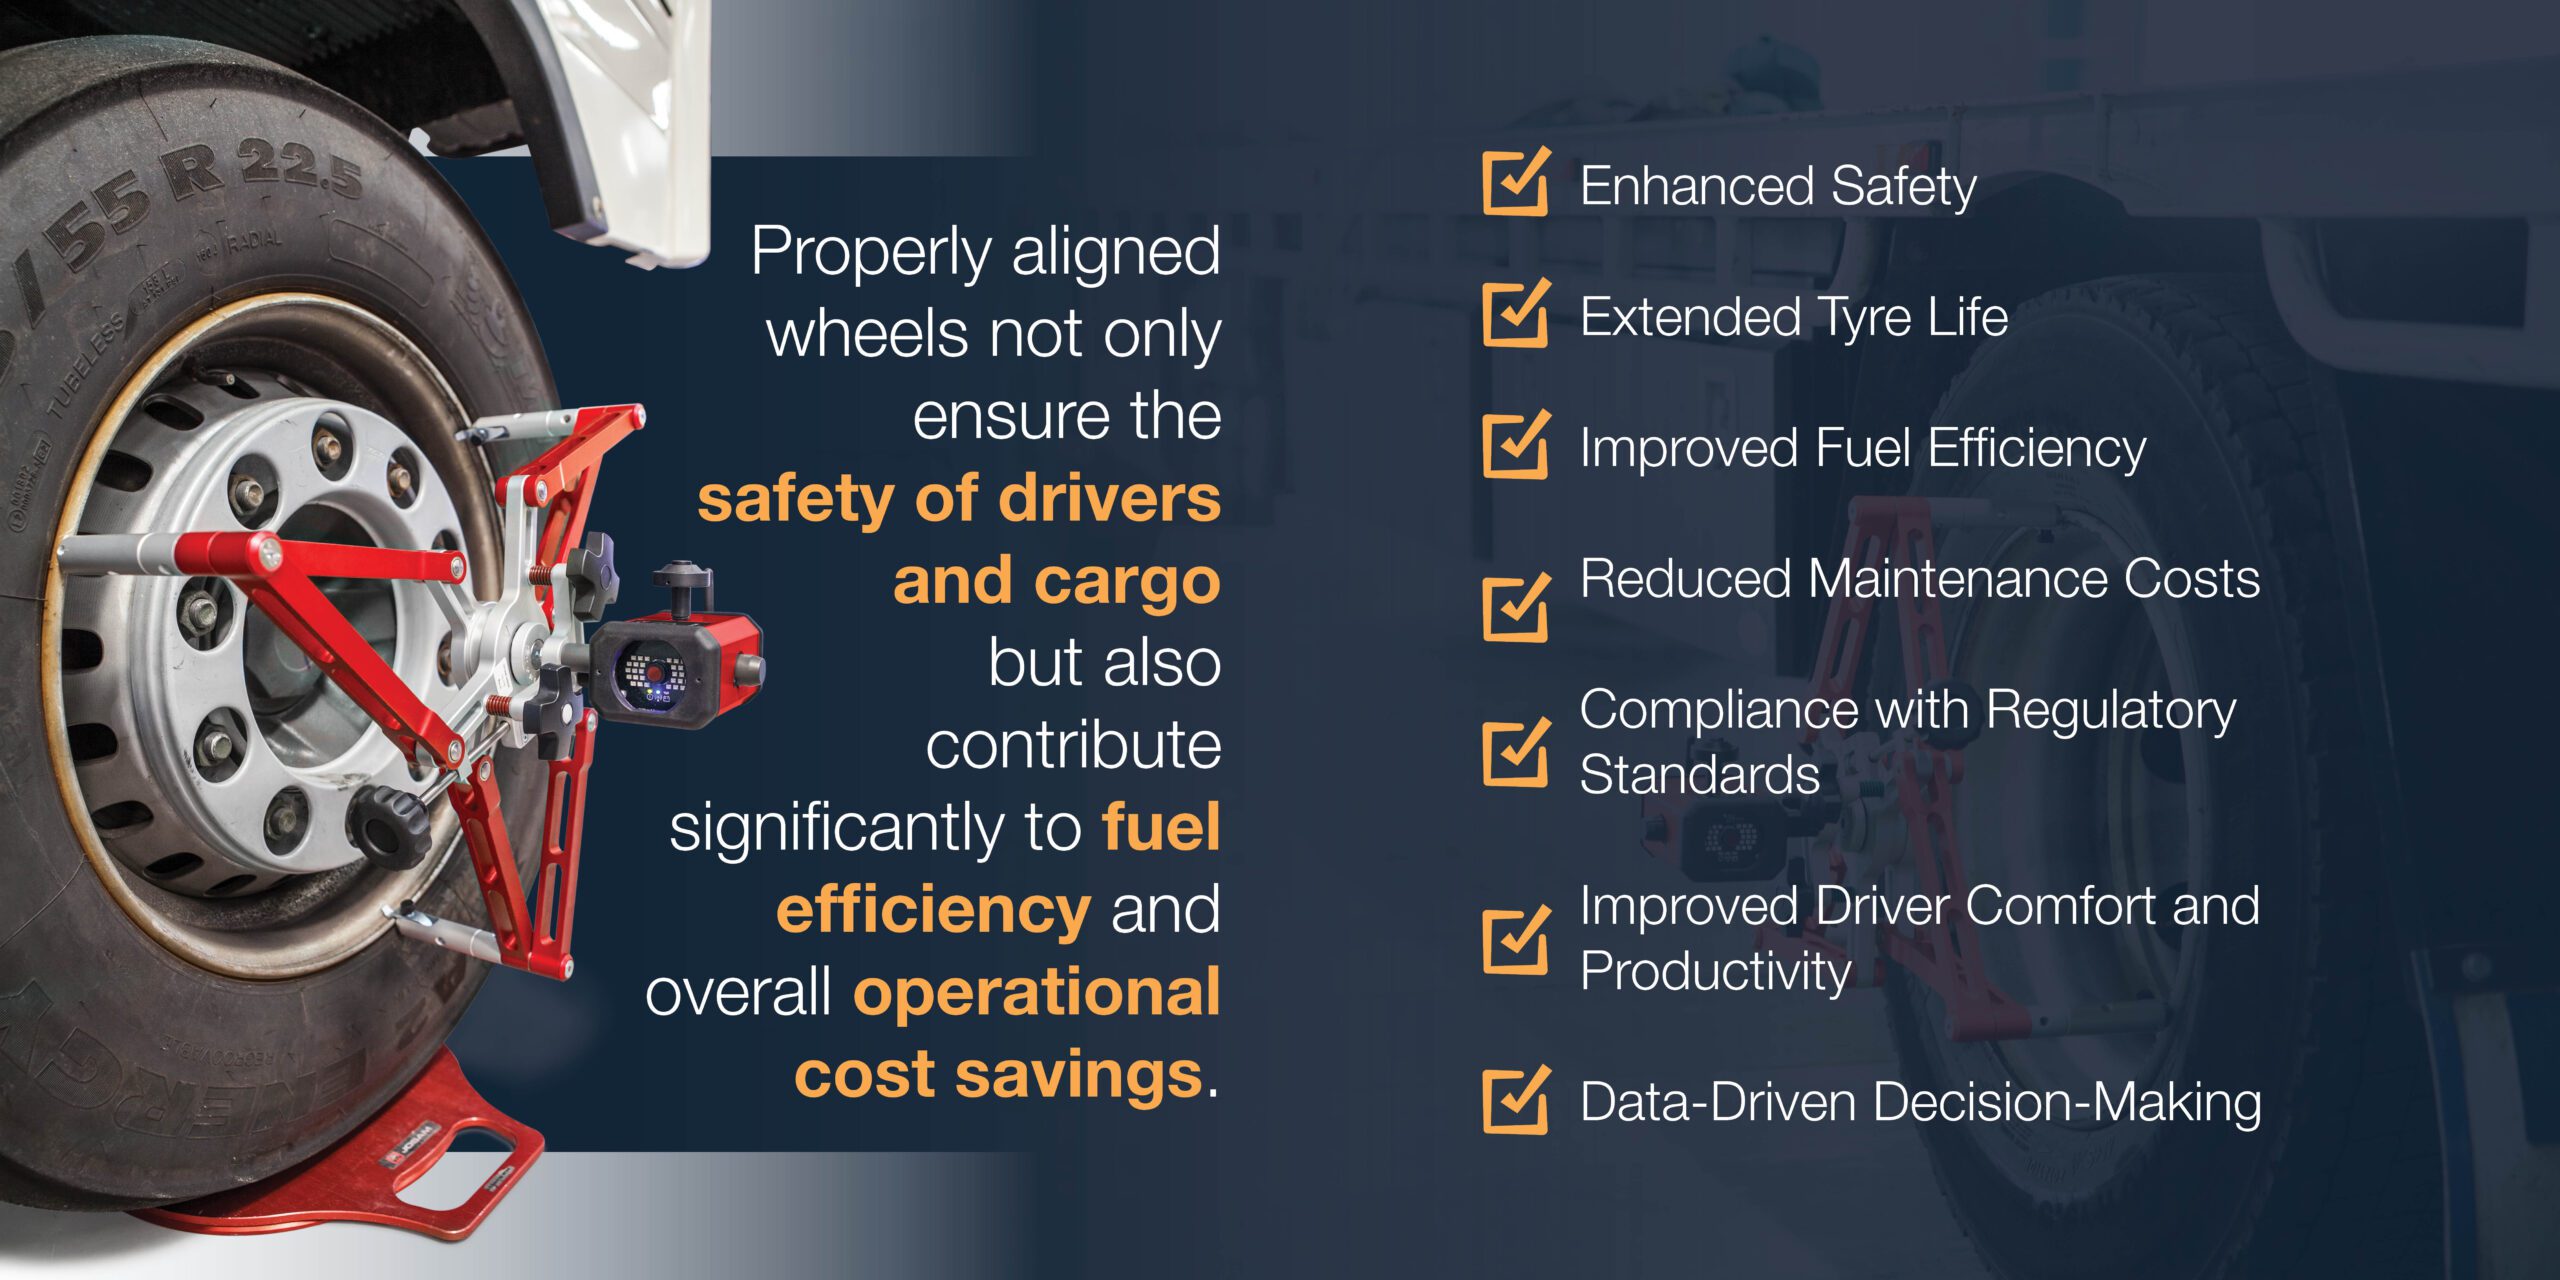 Maximising Efficiency and Safety: The Importance of In-House Wheel Alignment for Heavy Vehicle Fleets - In the world of heavy vehicle fleets, maintaining optimal performance is paramount. One often overlooked but crucial aspect of fleet maintenance is wheel alignment. Properly aligned wheels not only ensure the safety of drivers and cargo but also contribute significantly to fuel efficiency and overall operational cost savings. In this article, we'll explore the reasons of the critical importance of in-house wheel alignment for heavy vehicle truck and bus fleets.